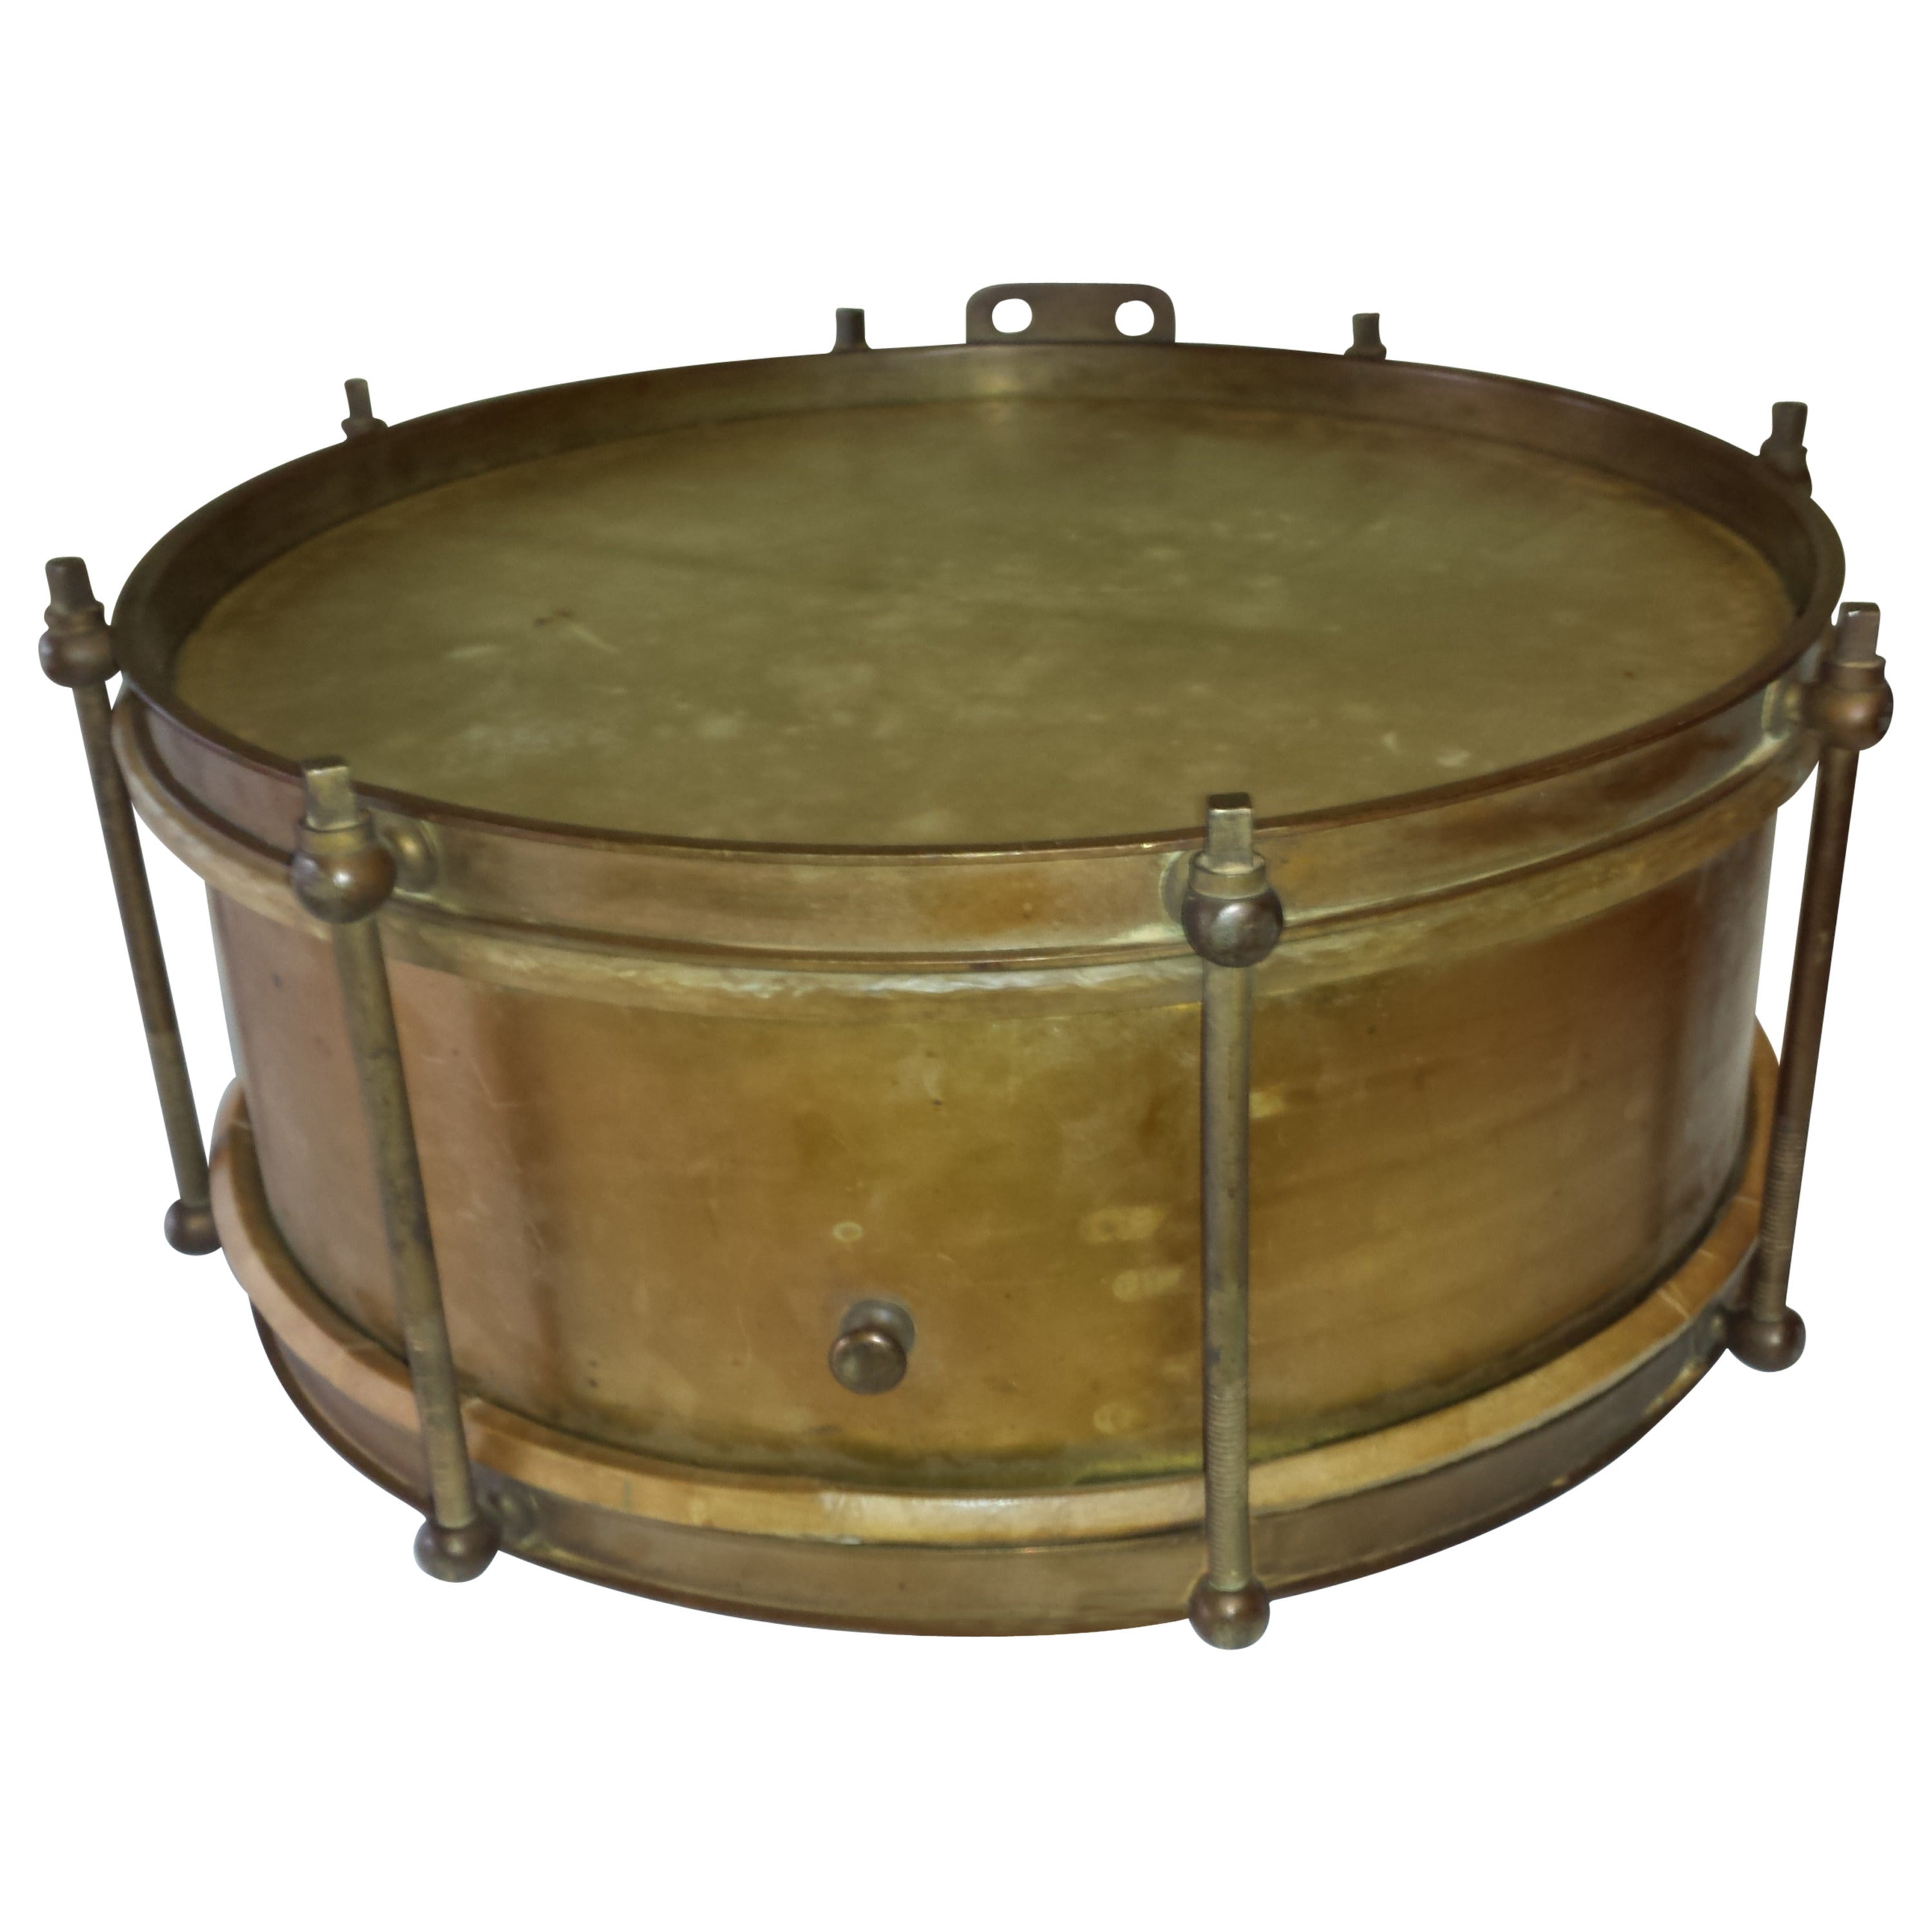 Brass Military or Marching Band Snare Drum, circa 1900